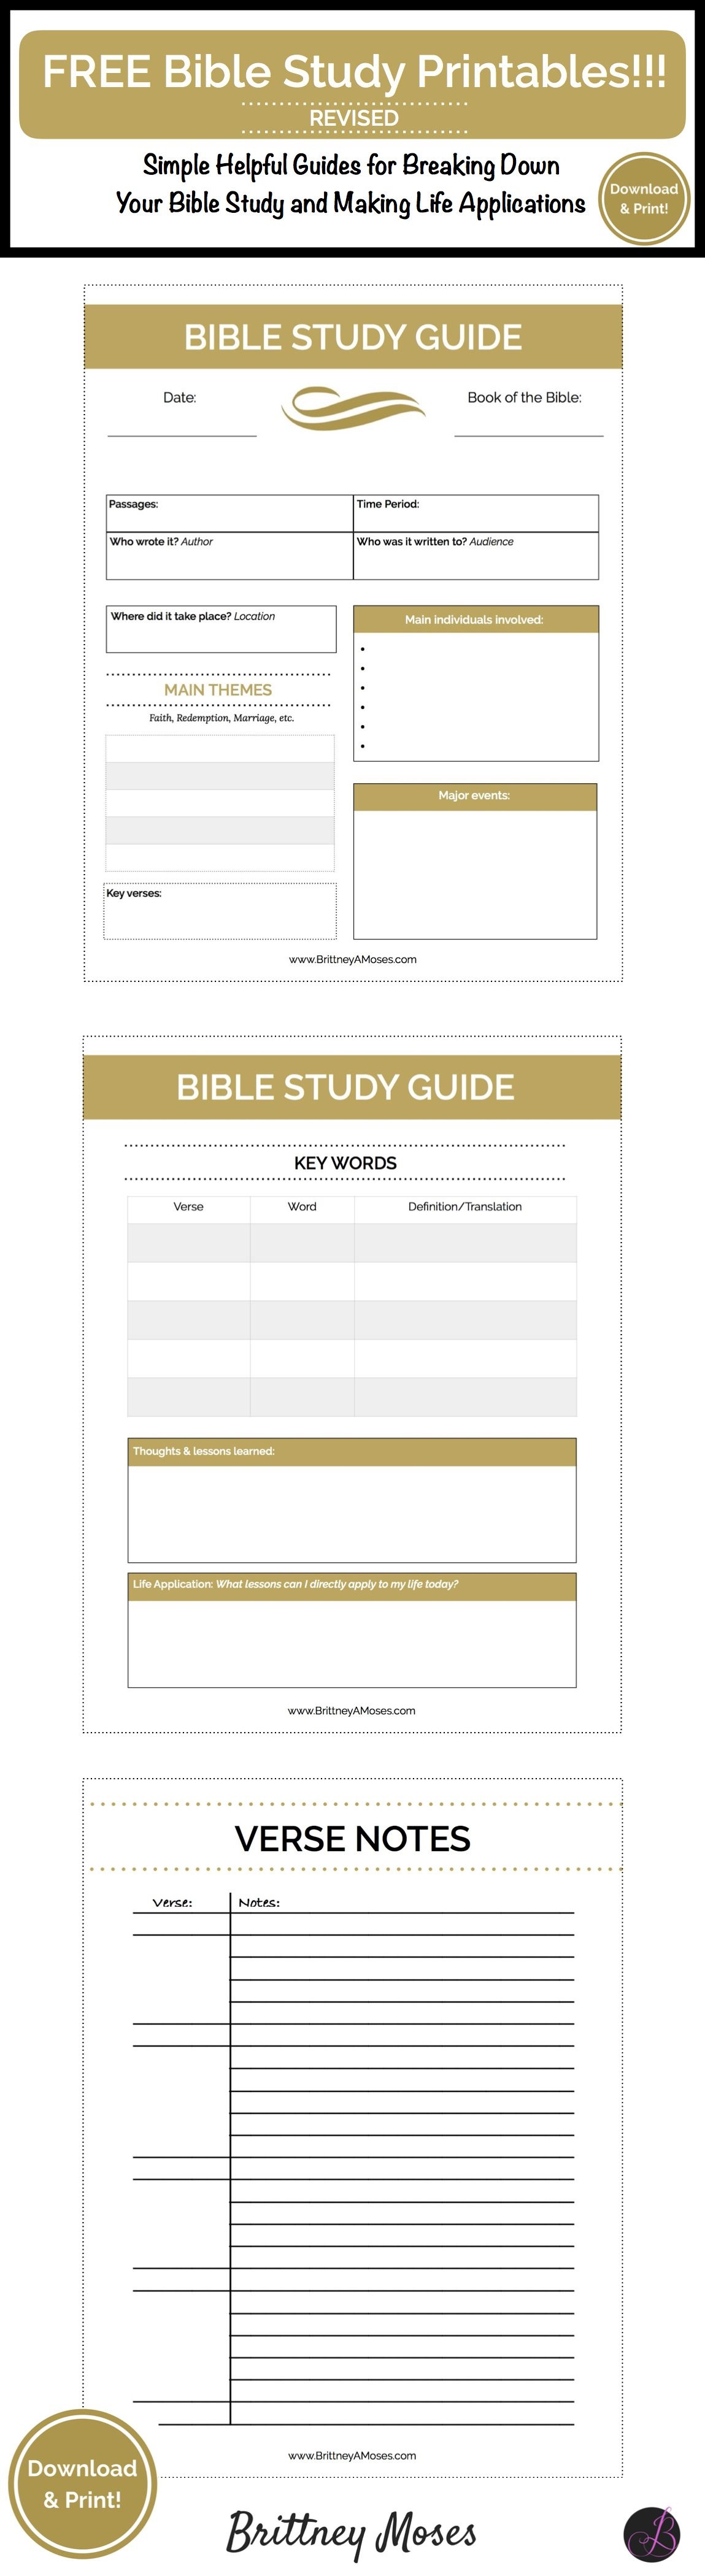 Newly Revised Printable Bible Study Guide | The Bible | Bible Study - Free Printable Bible Study Guides